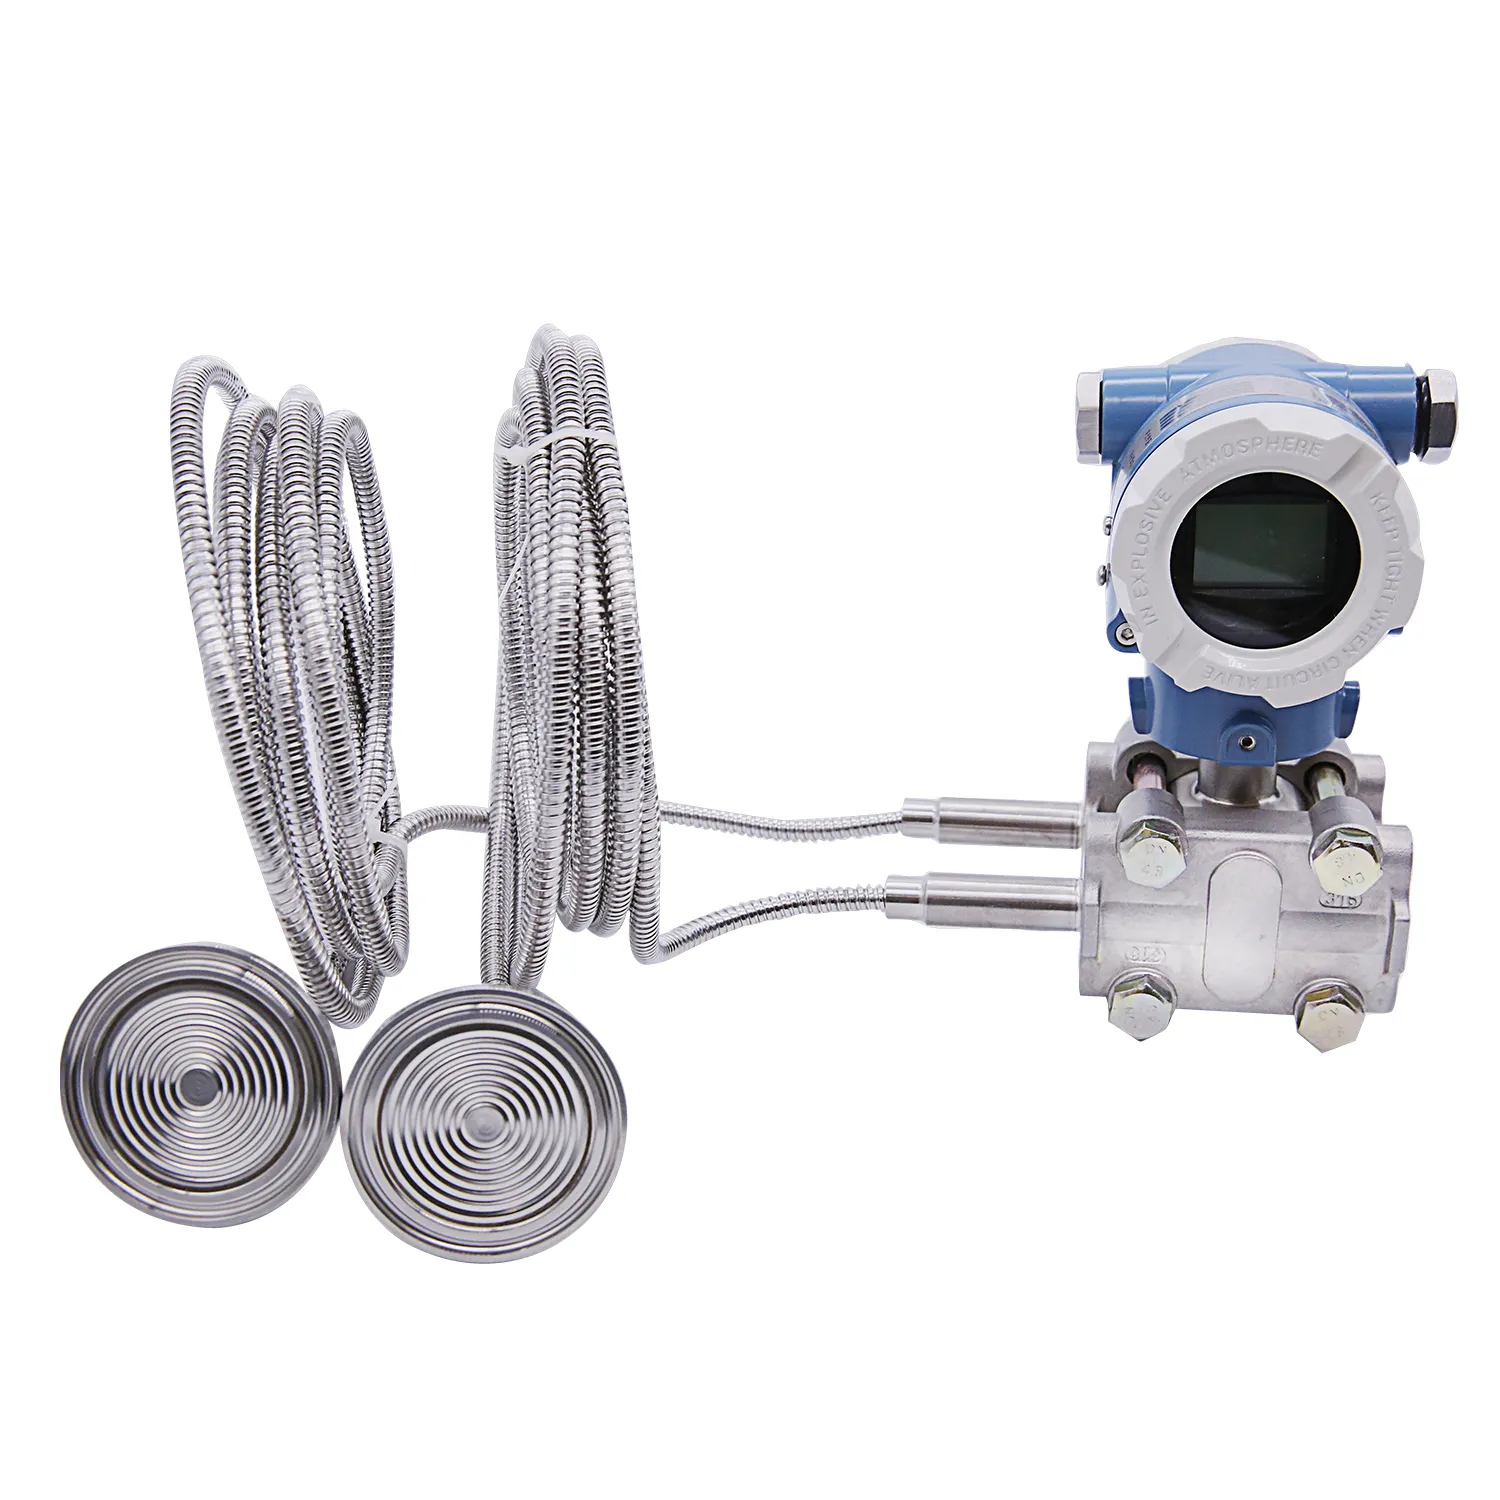 Smart AT3051 remote seal level transmitter differential pressure level transmitter with capillary